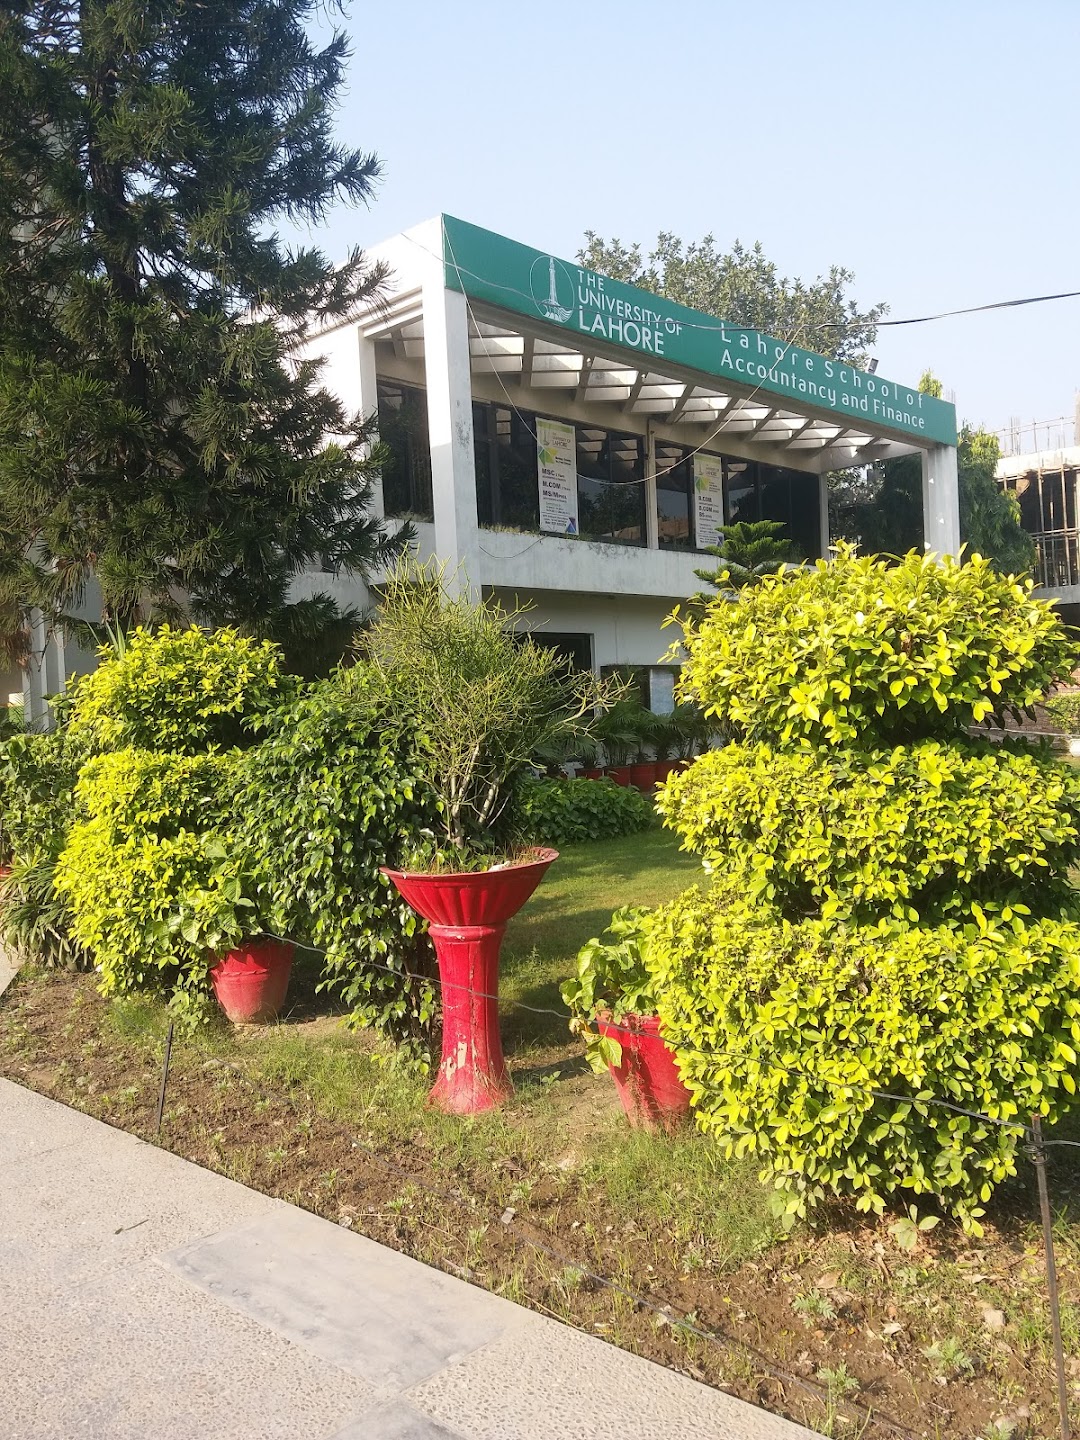 The University of Lahore (City Campus)